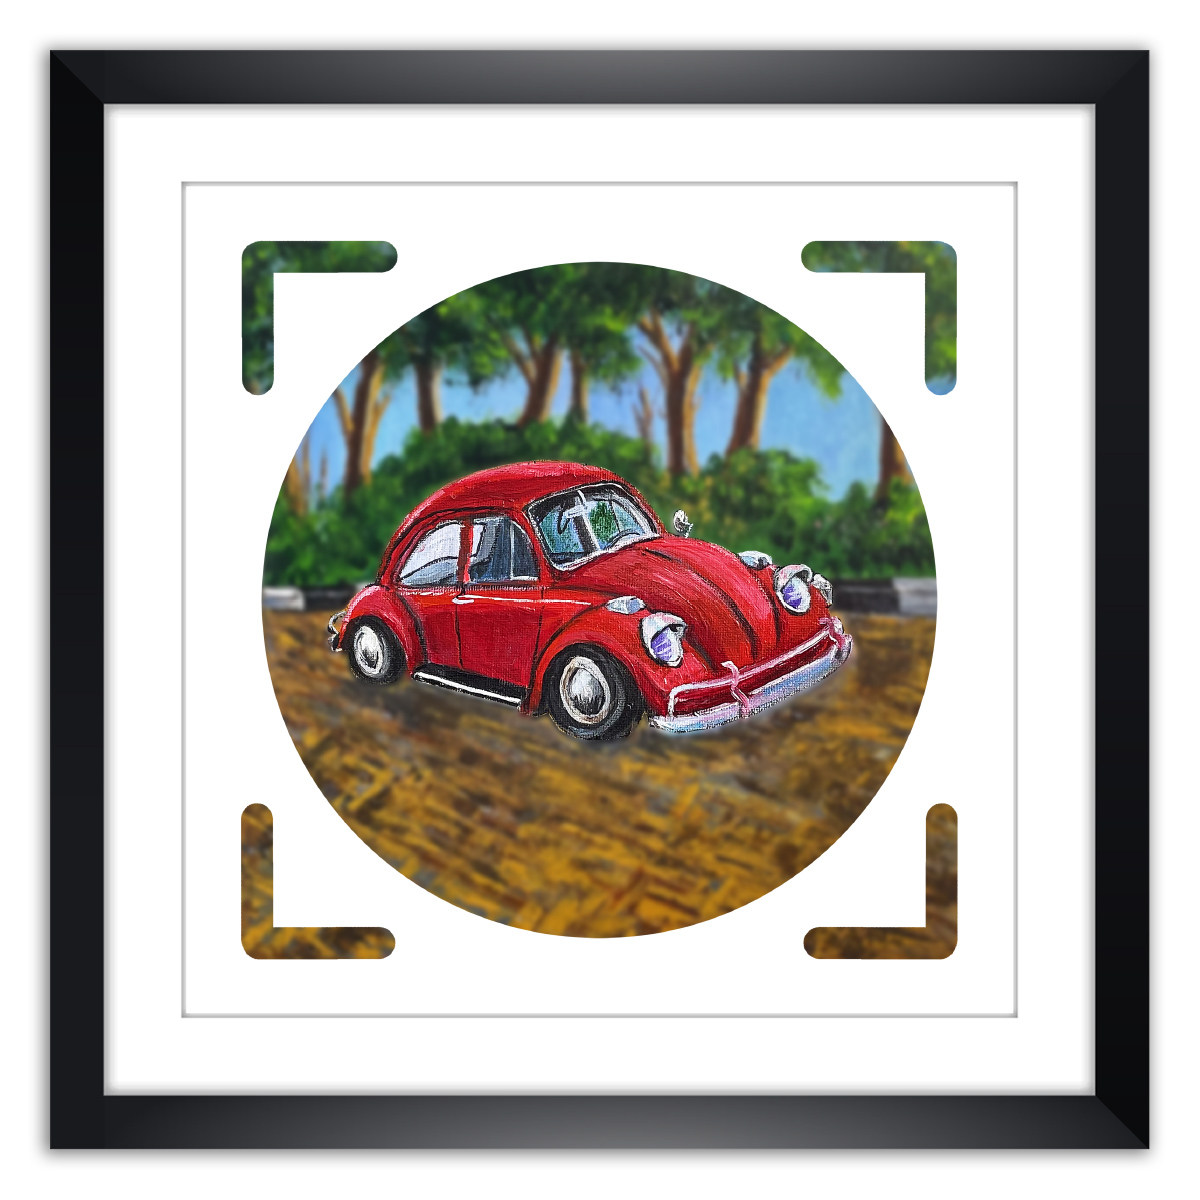 Limited prints - MY DREAM CAR by Ad framed - ONE AND ONE MAKES TWO